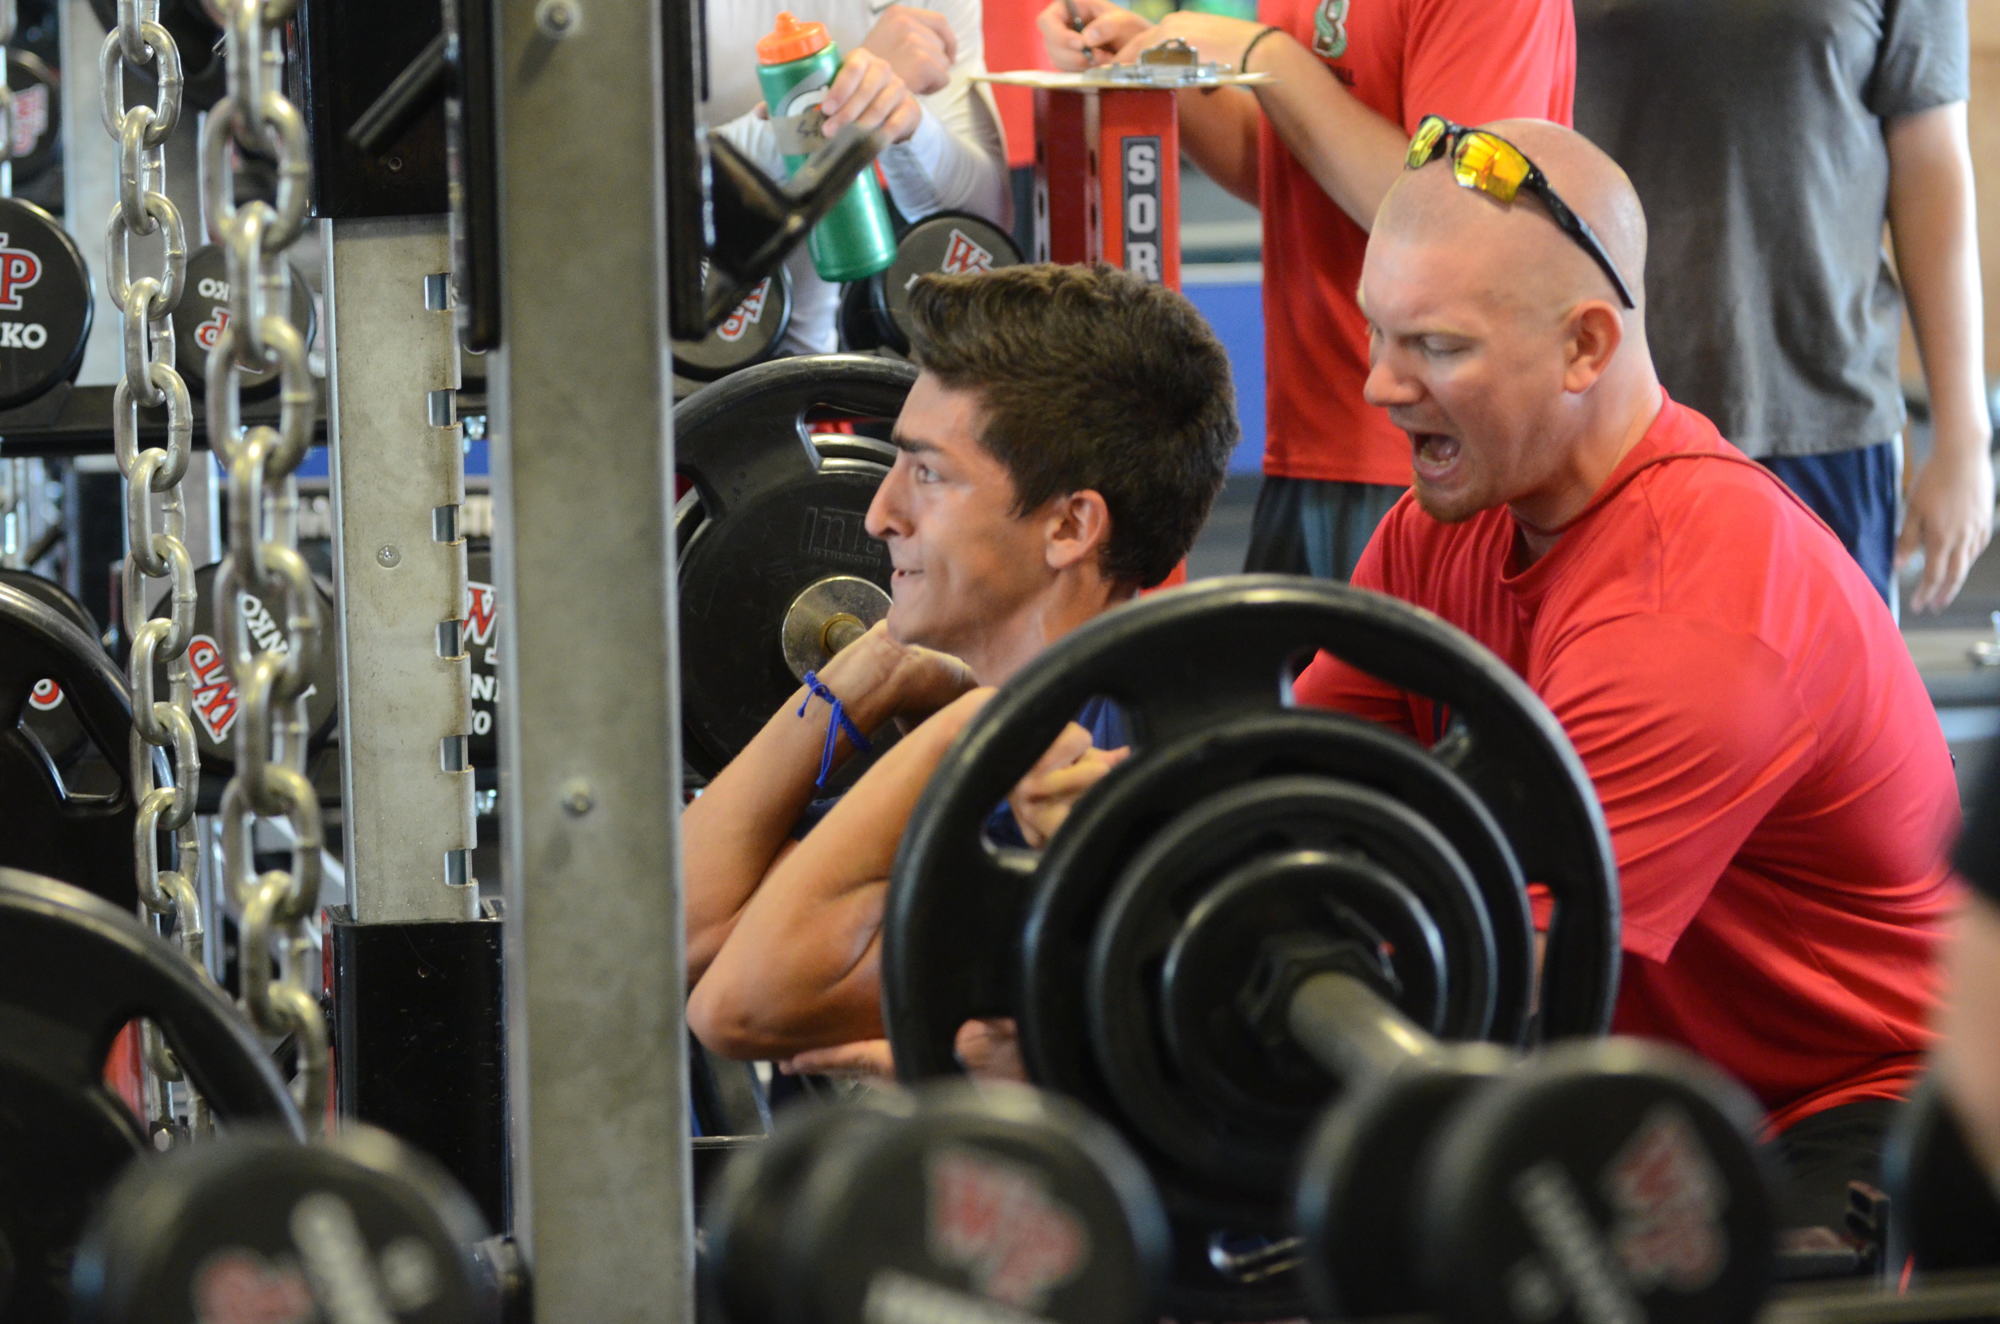 Gibert works hard to create a culture of competition in the weight room on campus.